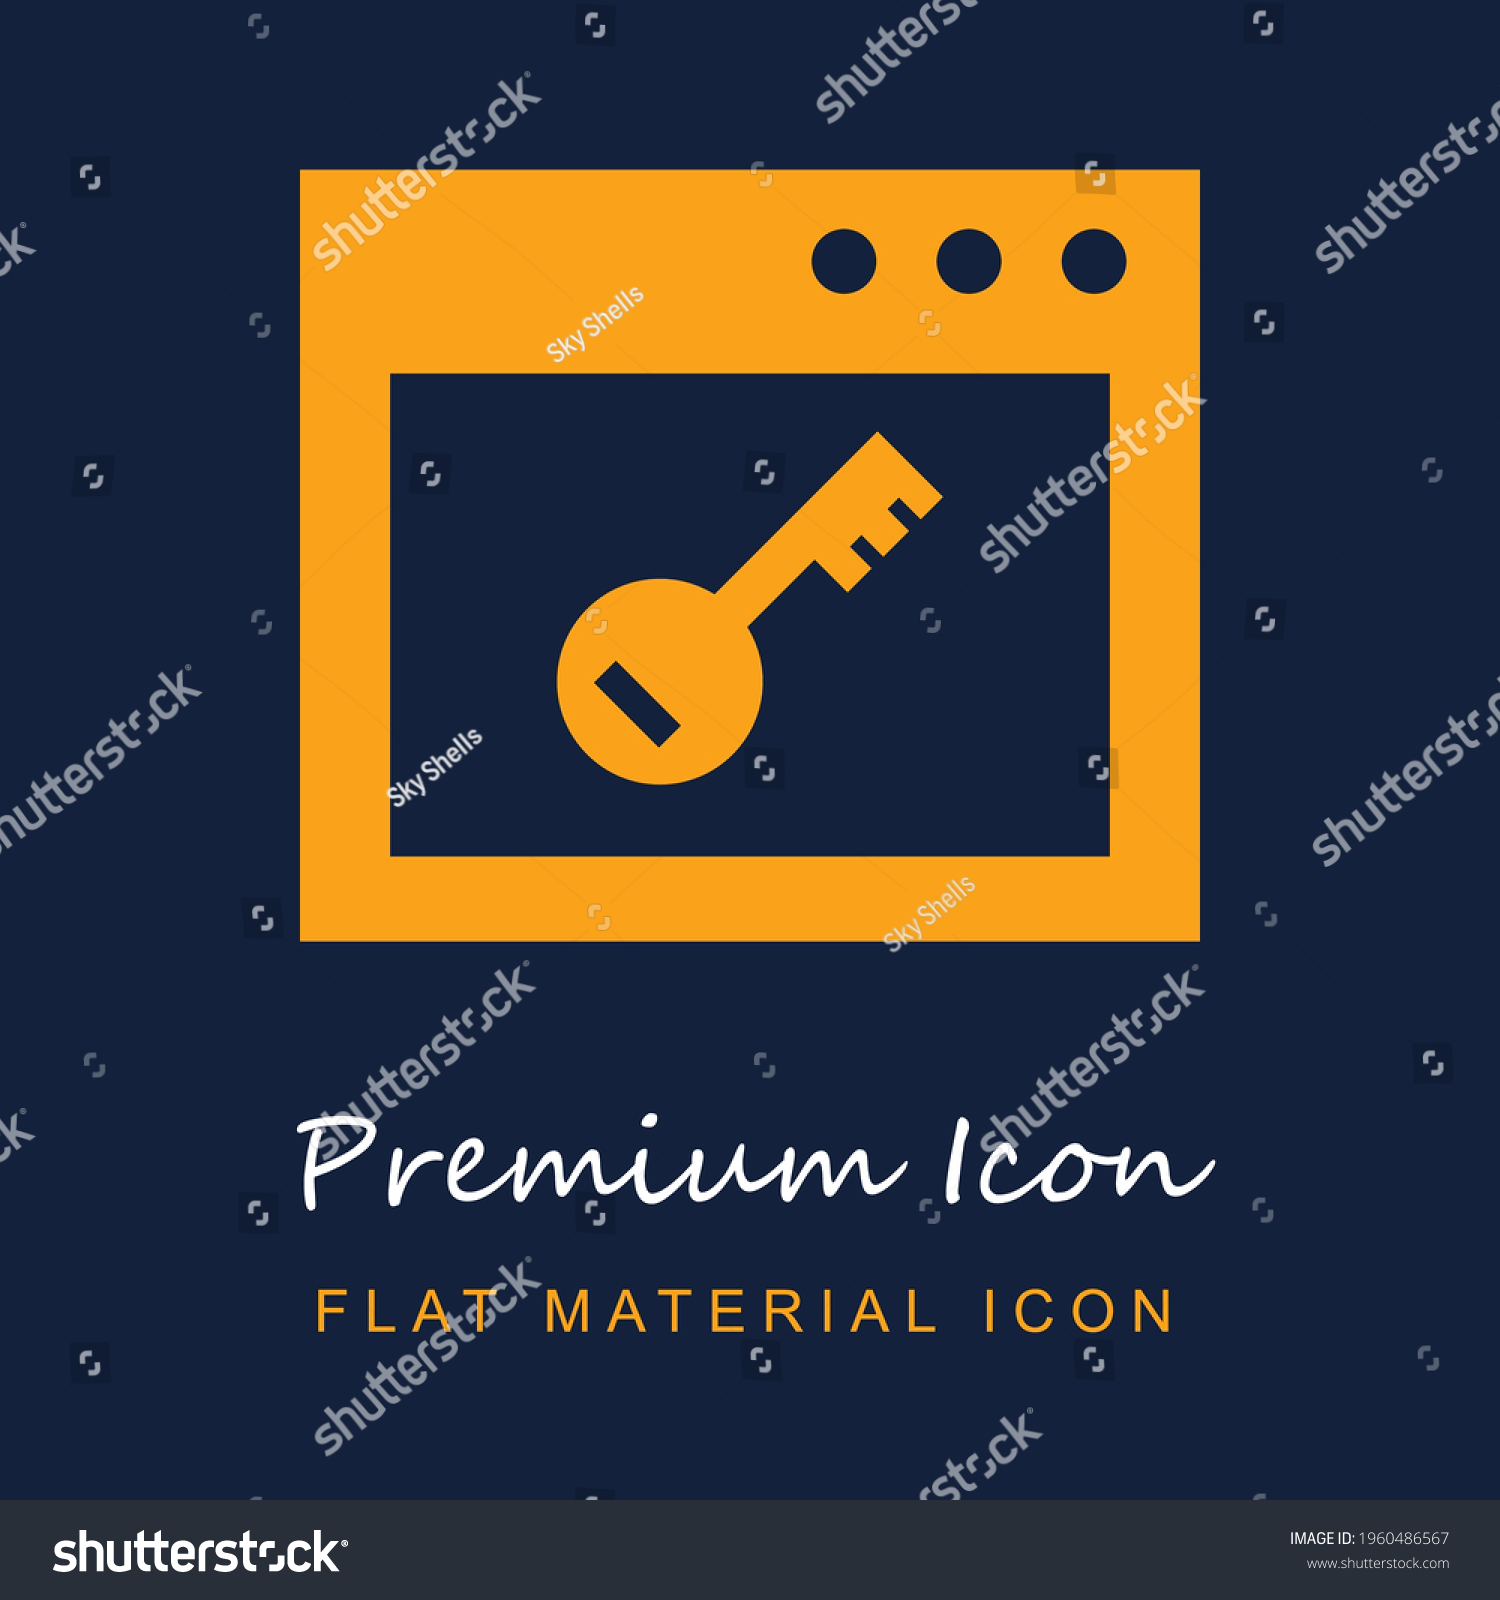 SVG of Browser Key premium material ui ux isolated vector icon in navy blue and orange colors svg